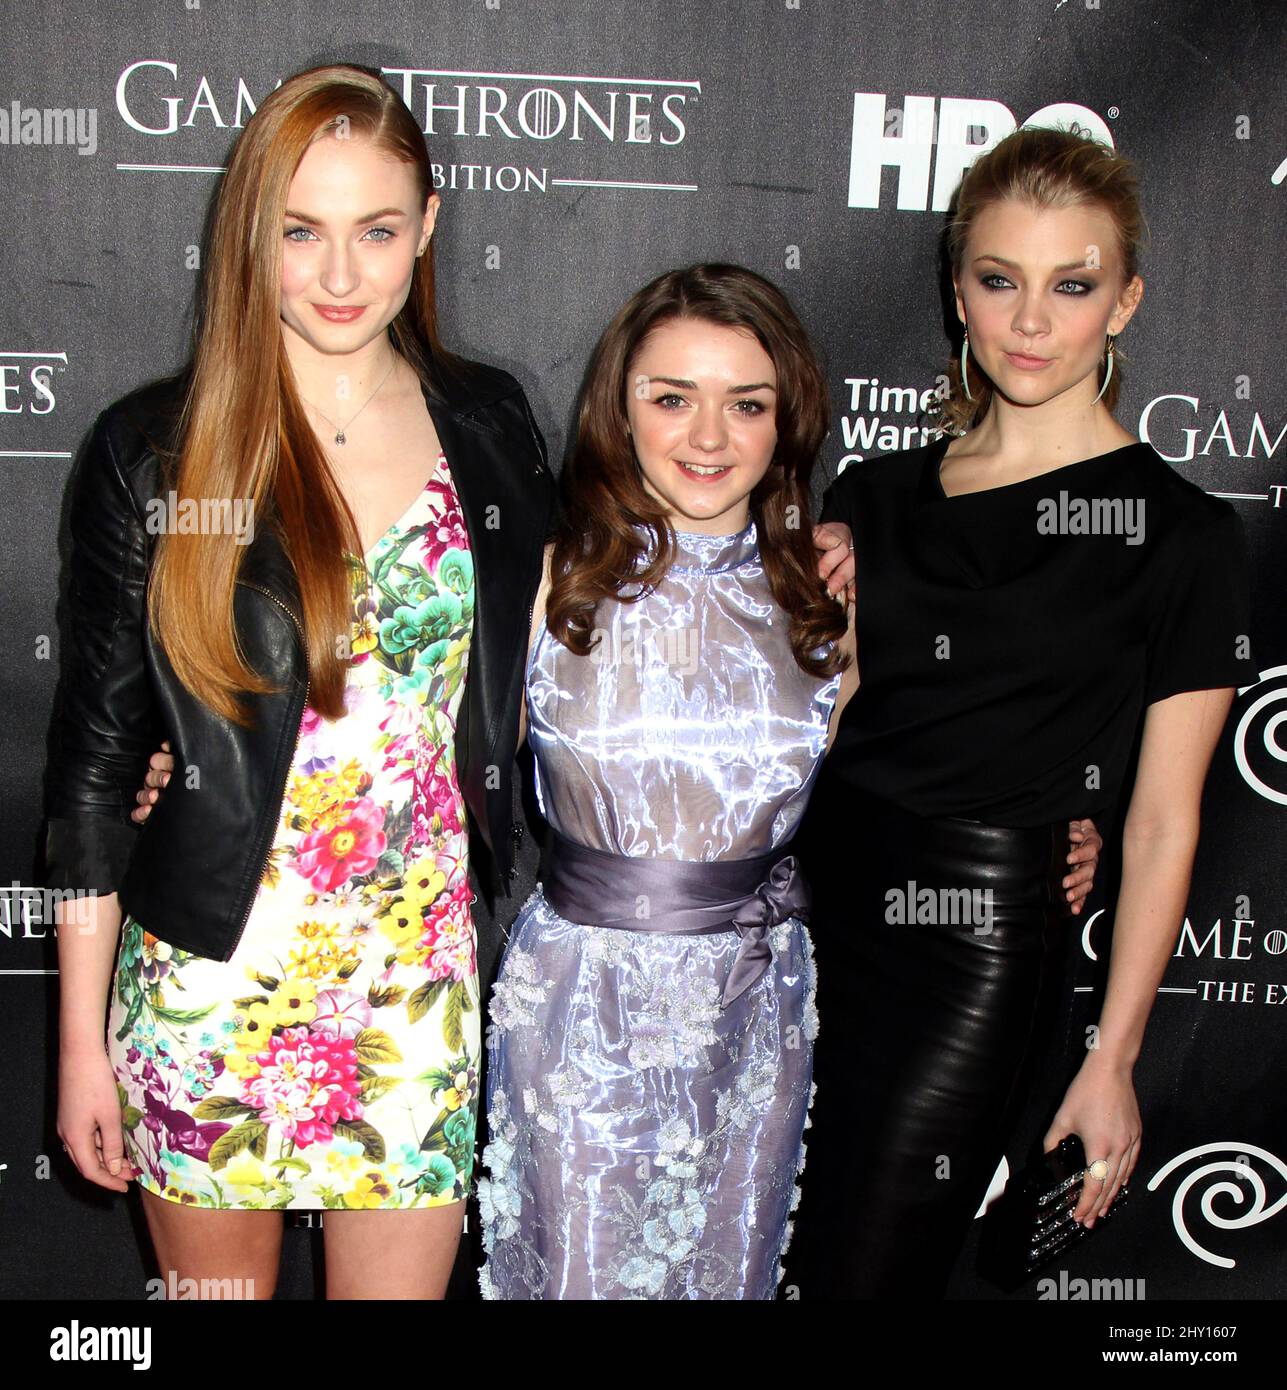 Sophie Turner, Maisie Williams (centre), and Natalie Dormer (right) attends the 'Game Of Thrones' exhibition opening hosted by HBO and Time Warner Cable on Wednesday March 27, 2013 in New York. Stock Photo